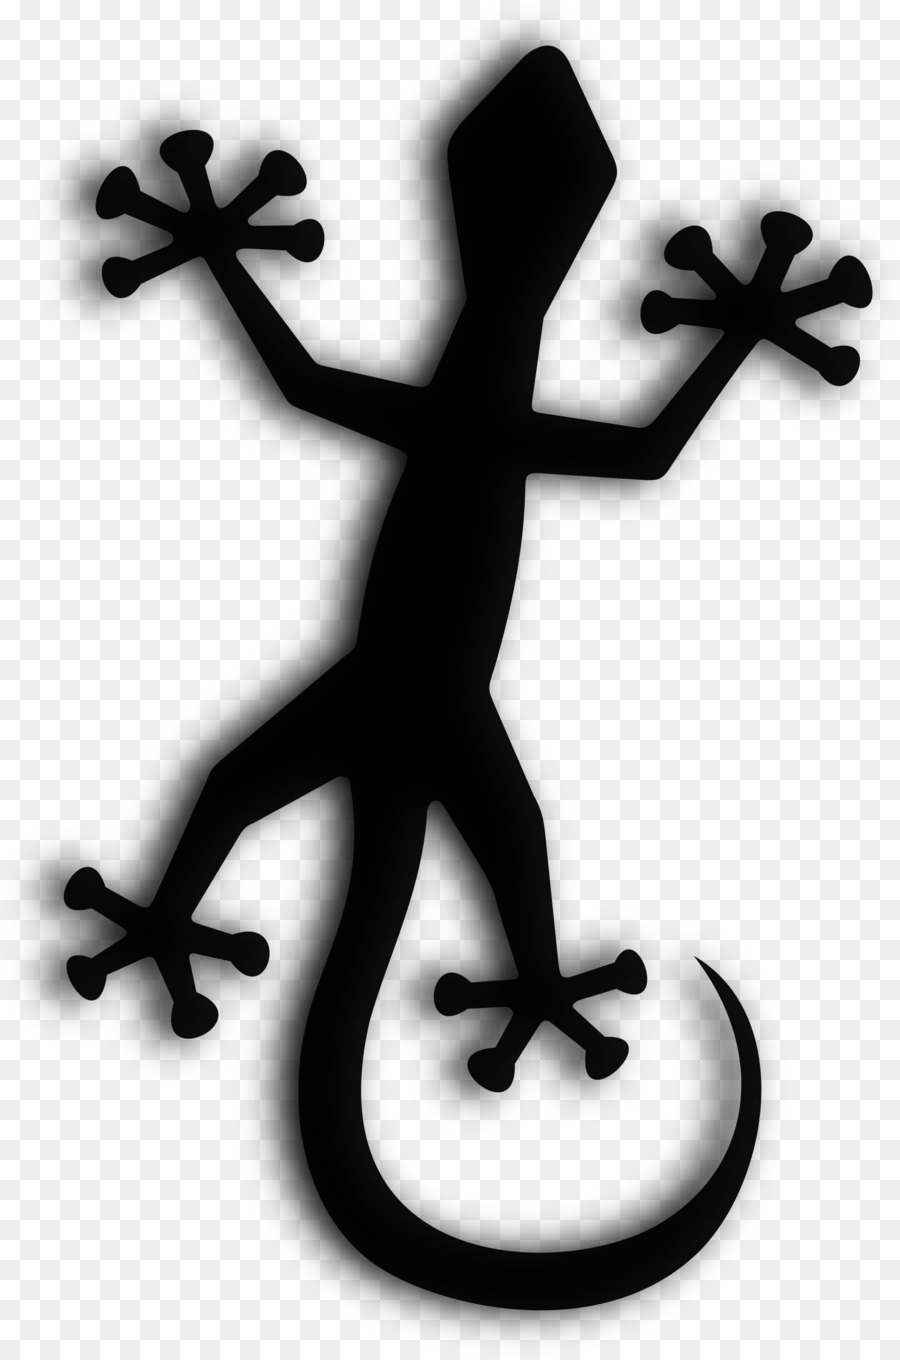 Silhouette Symbol Gecko -  png download - 1593*2400 - Free Transparent Silhouette png Download.